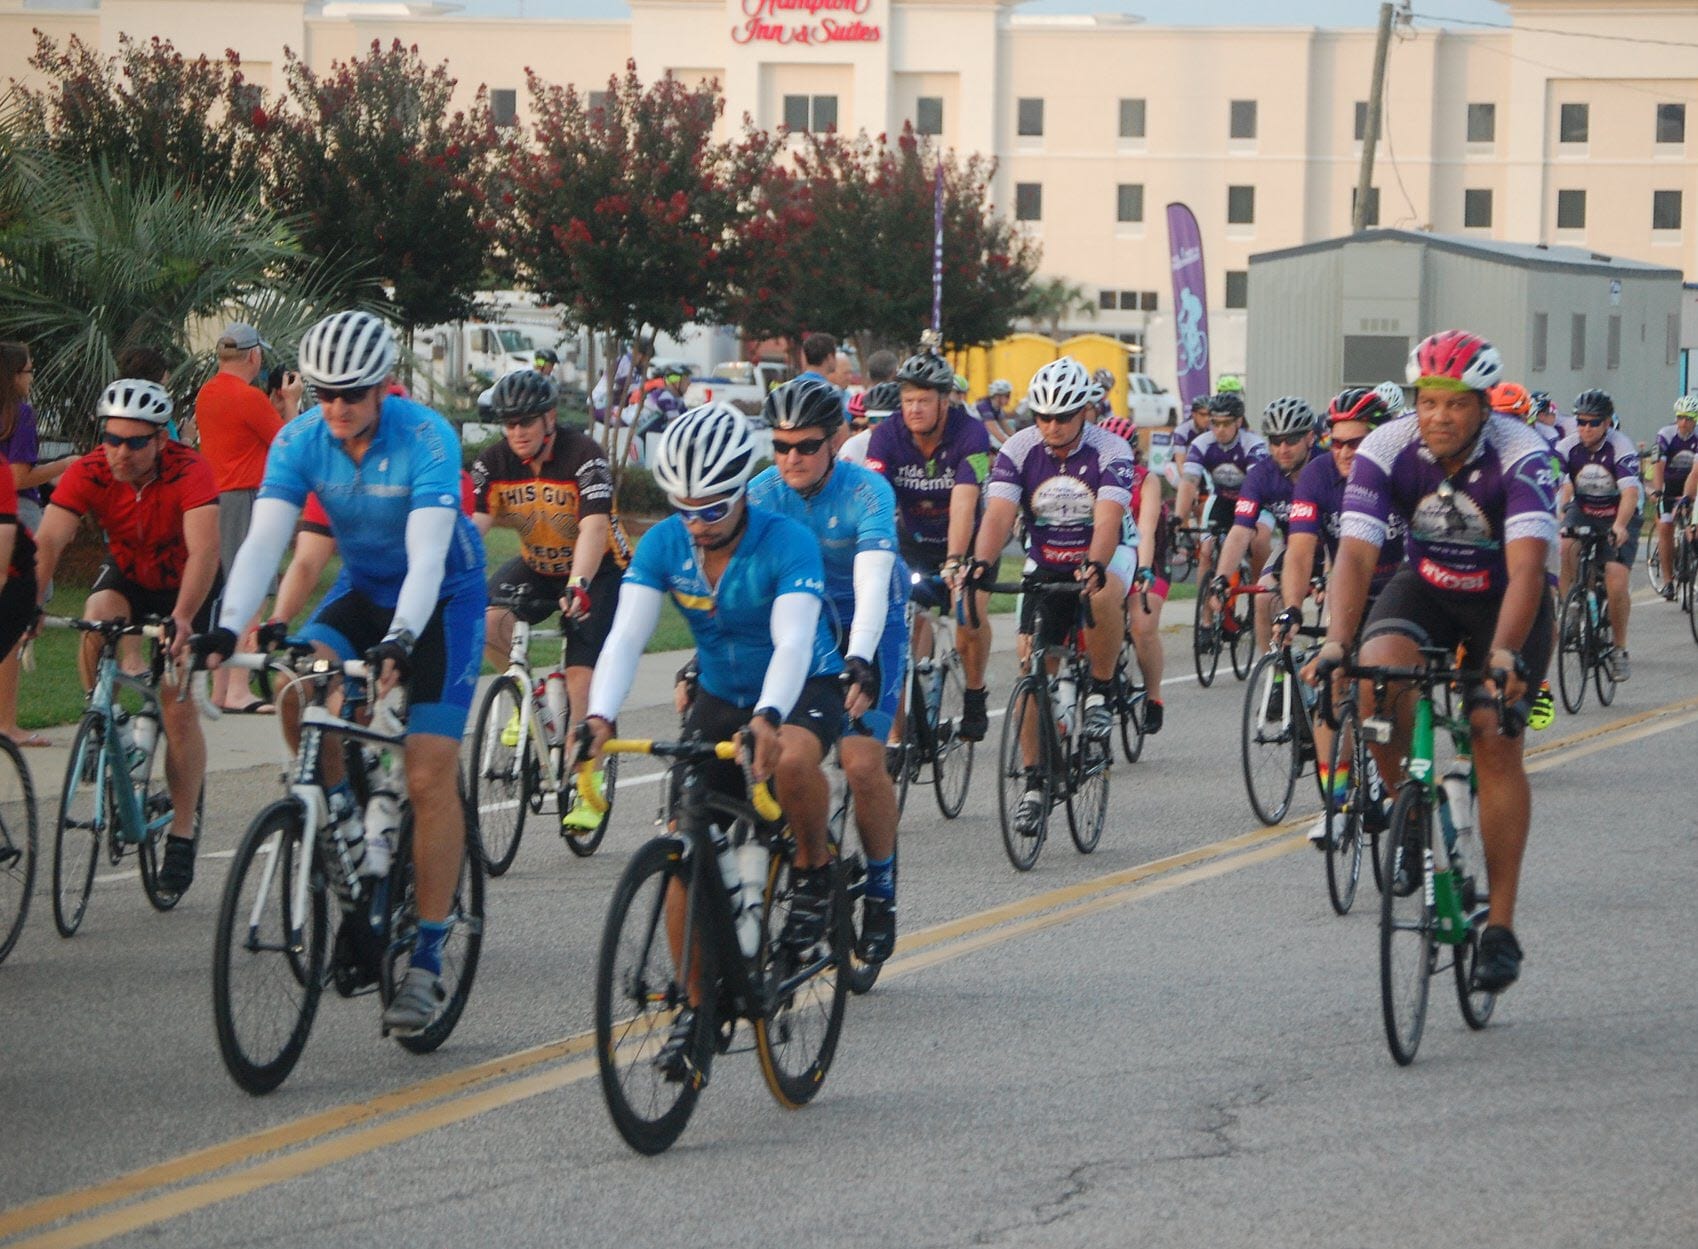 “A Ride to Remember” benefiting the Alzheimer’s Association